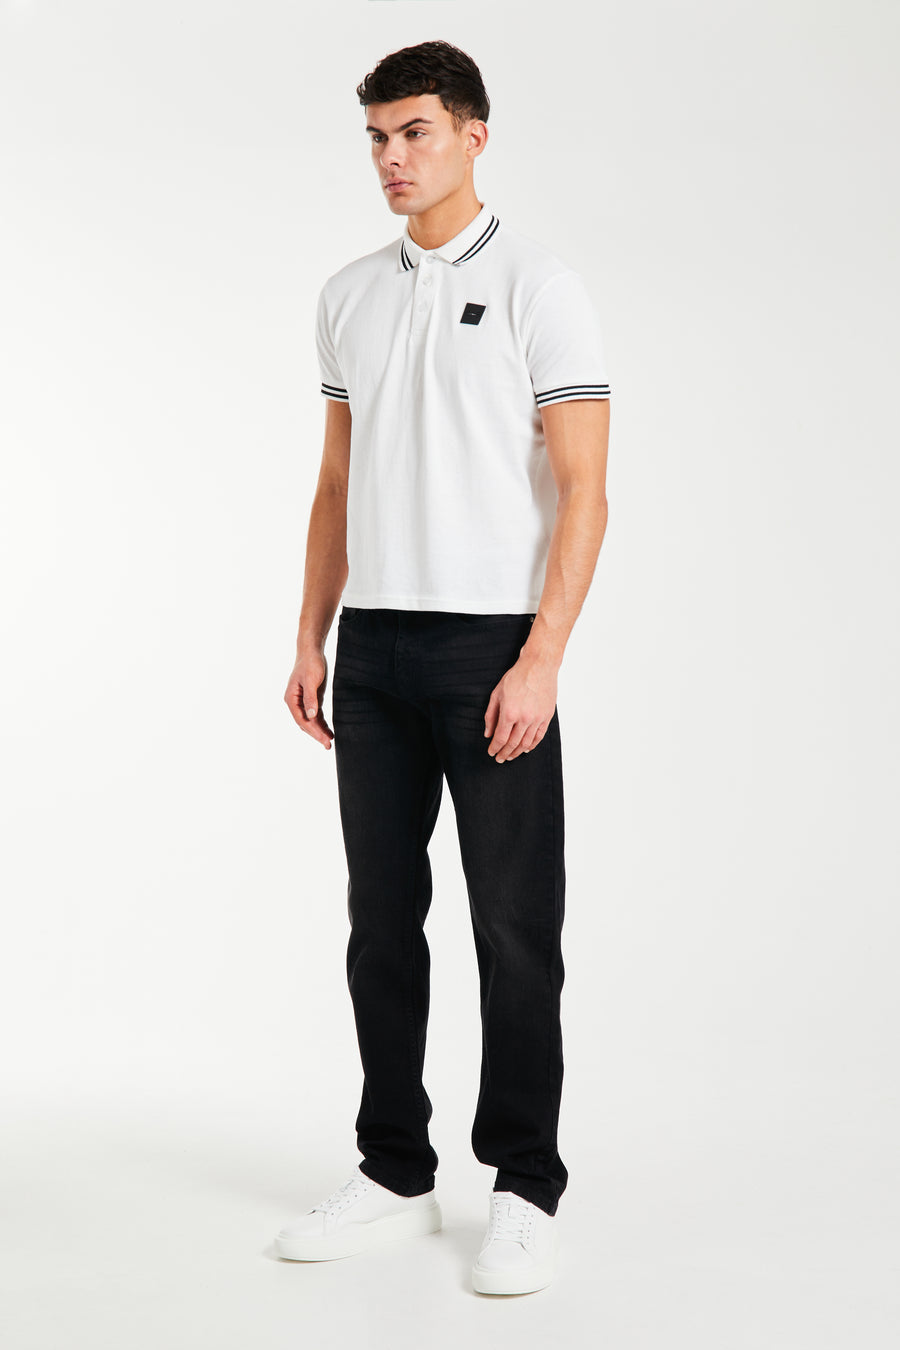 Cheap polo shirts for men in white with black trim